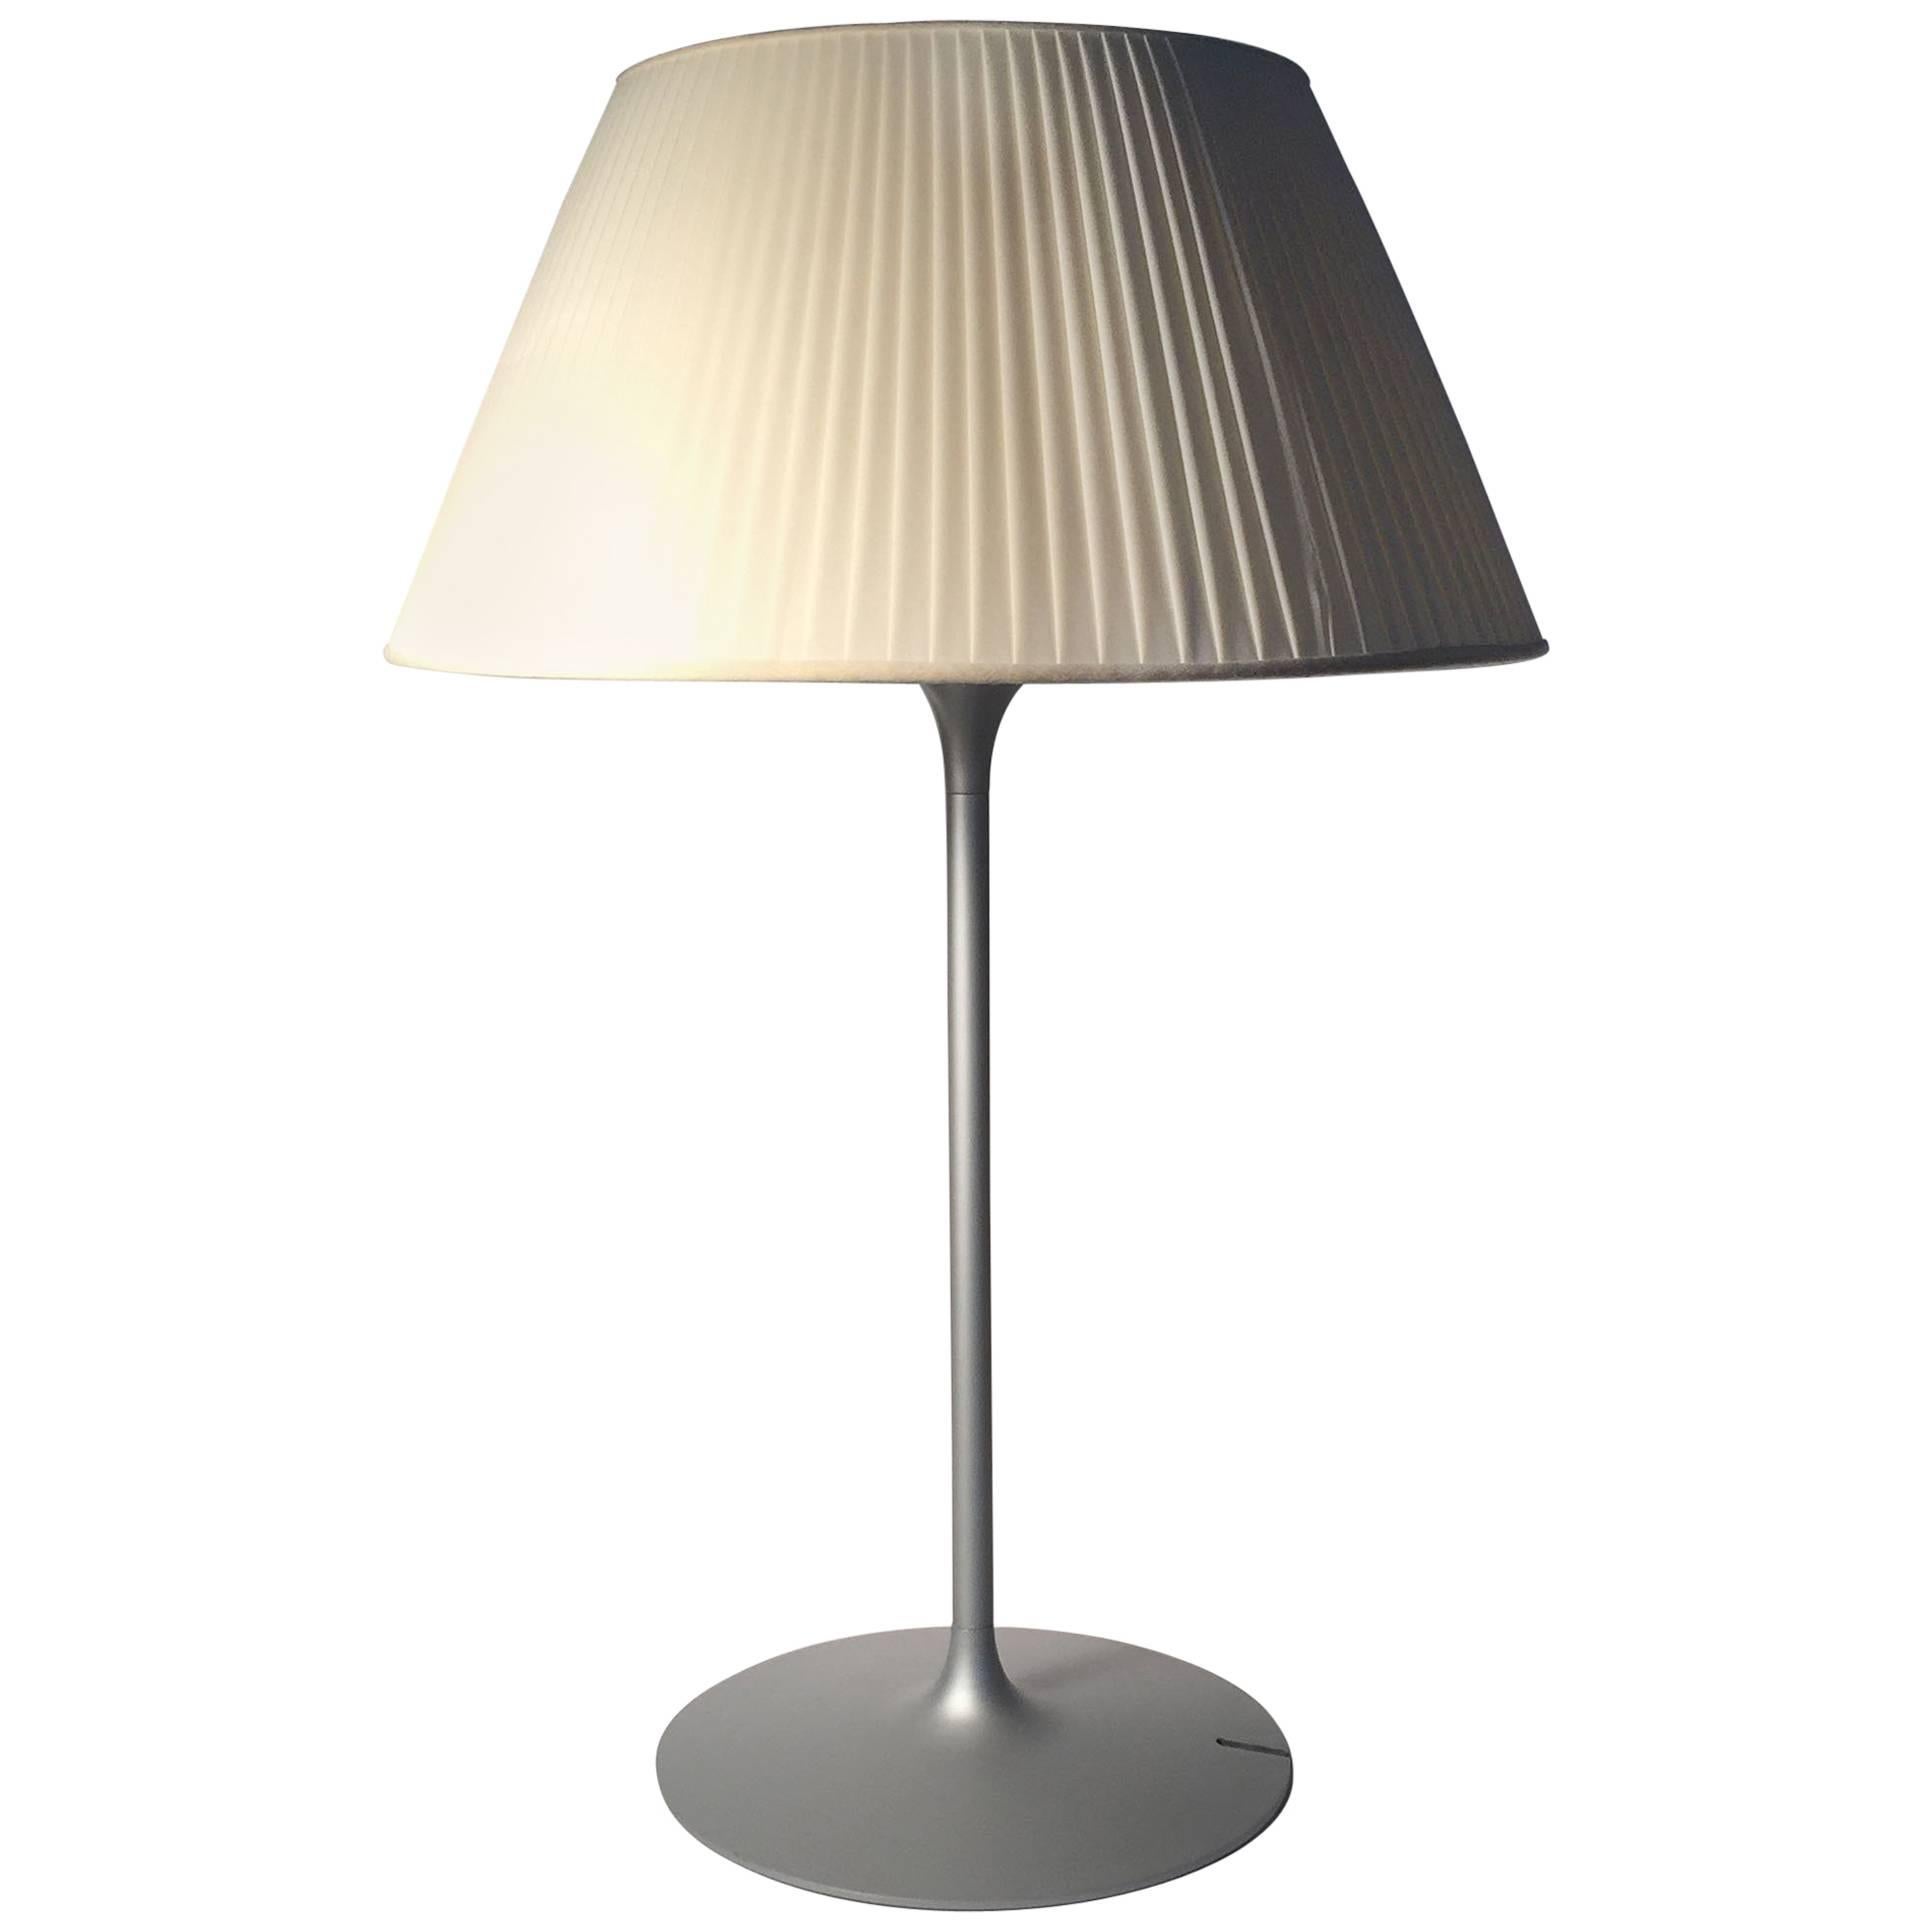 Vintage Flos Romeo Soft 1 Table Lamp by Philippe Starck